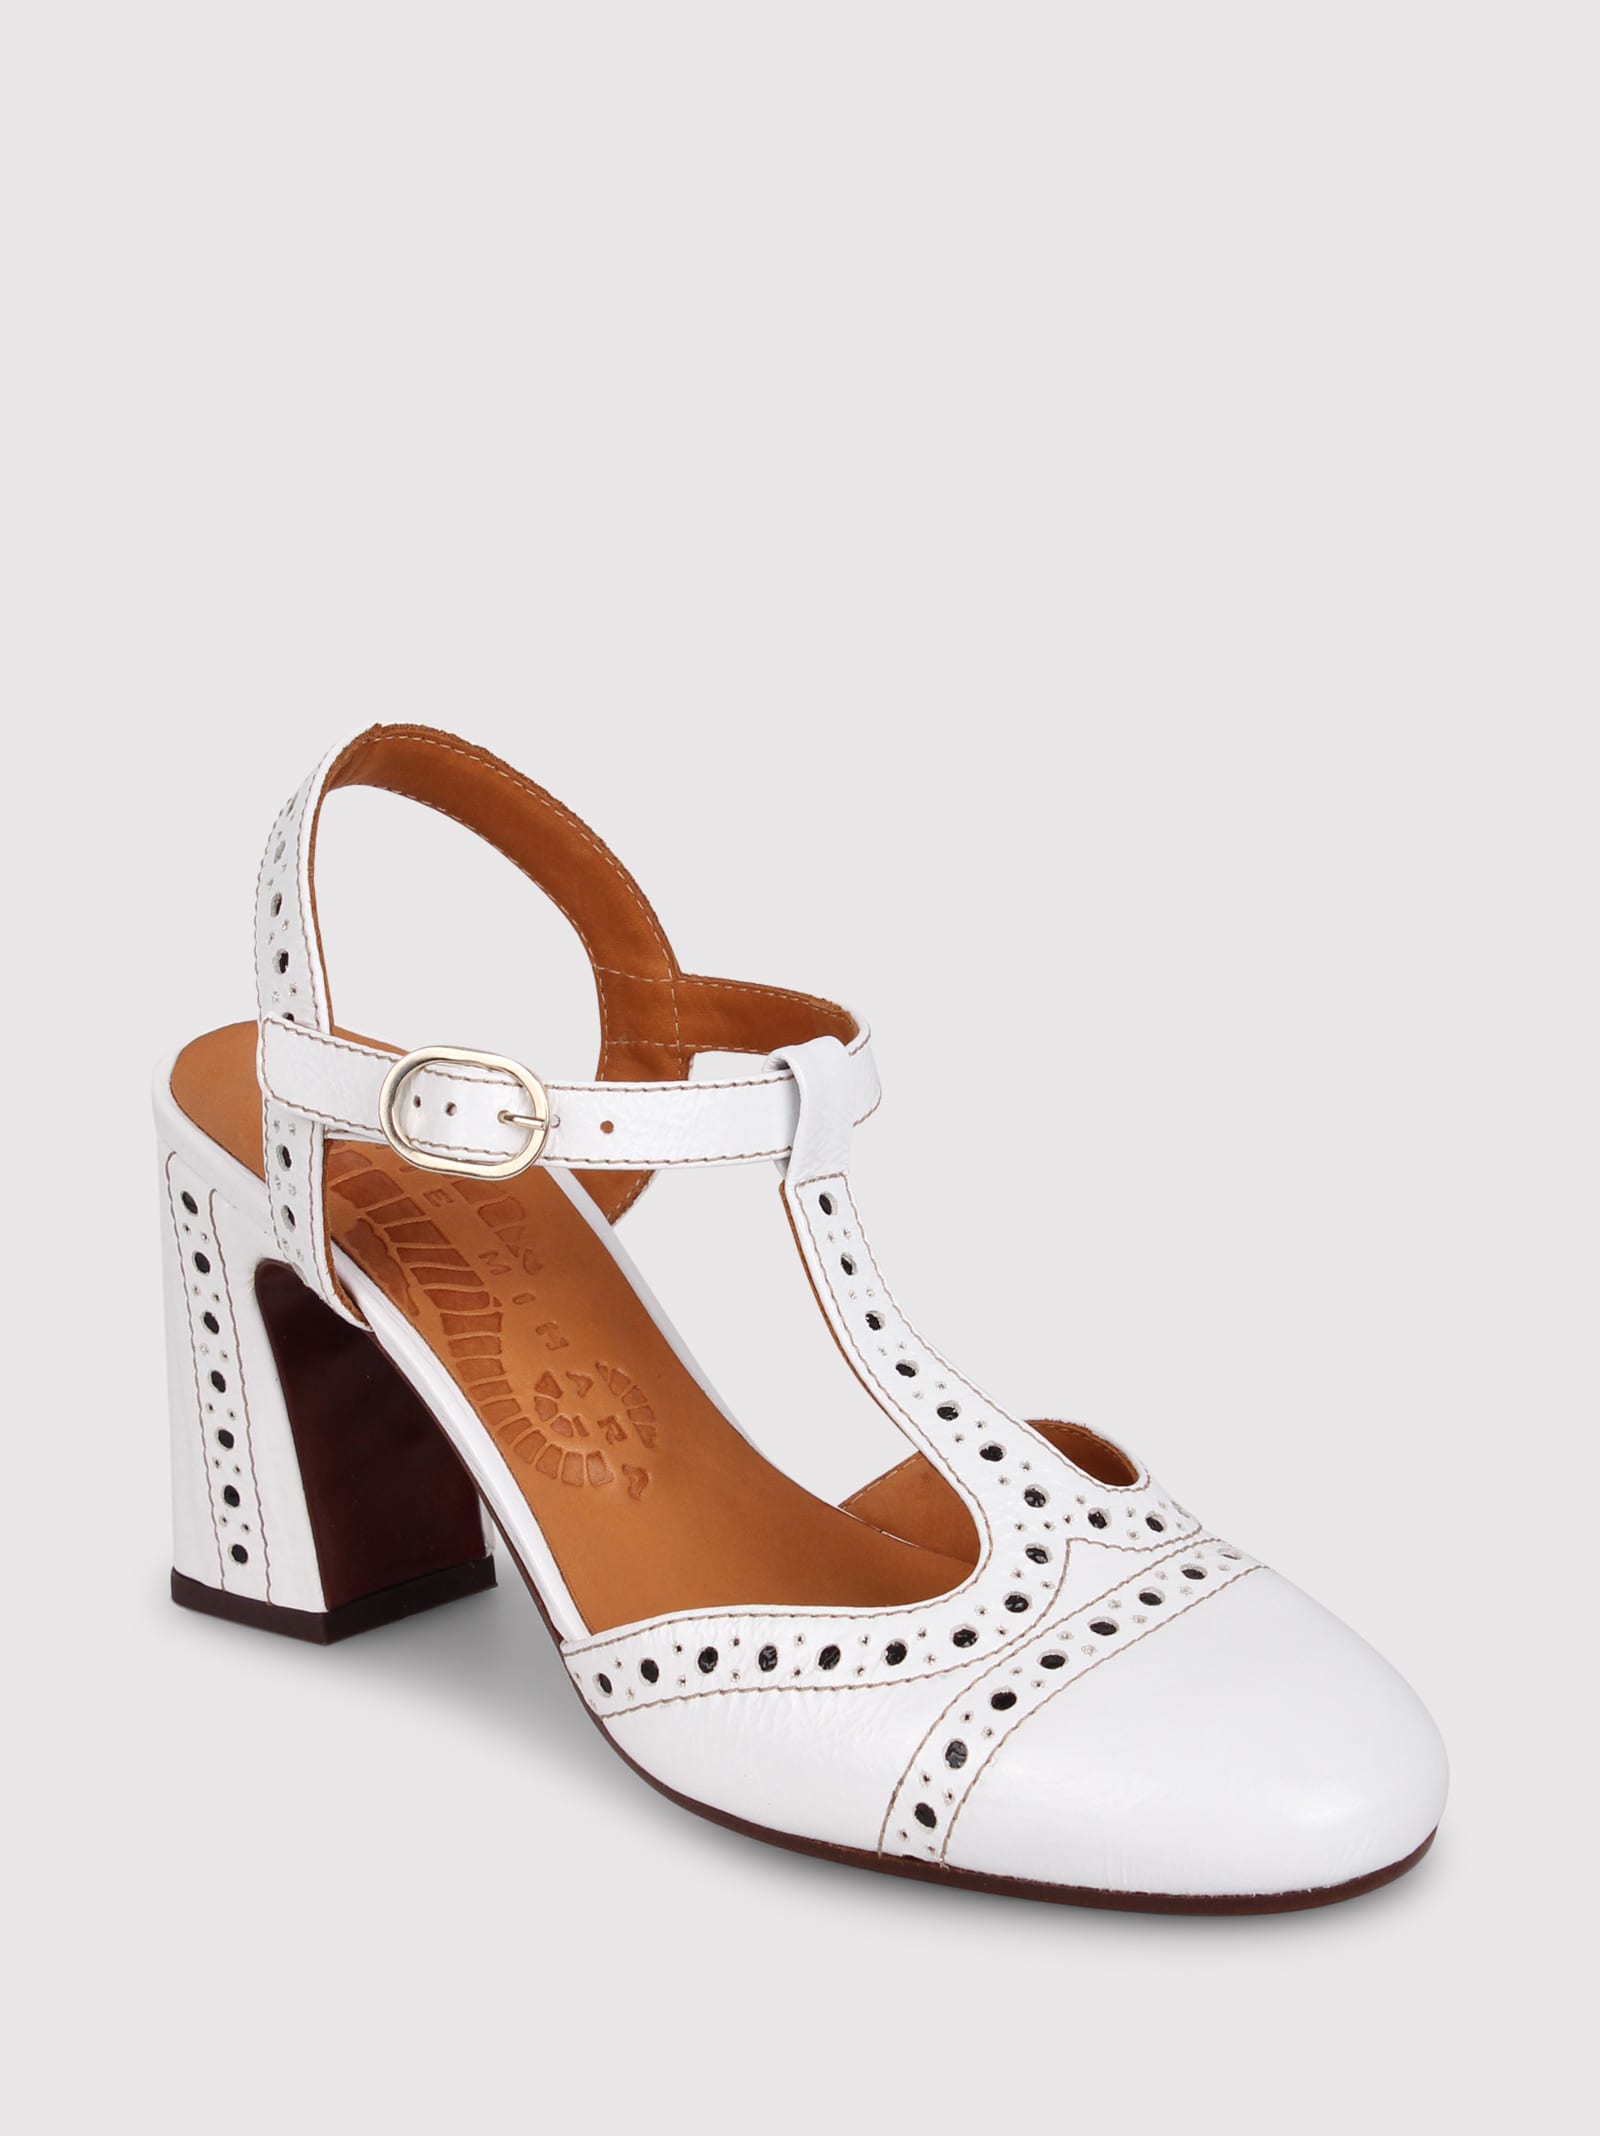 Shop Chie Mihara Mira 85mm Leather Pumps